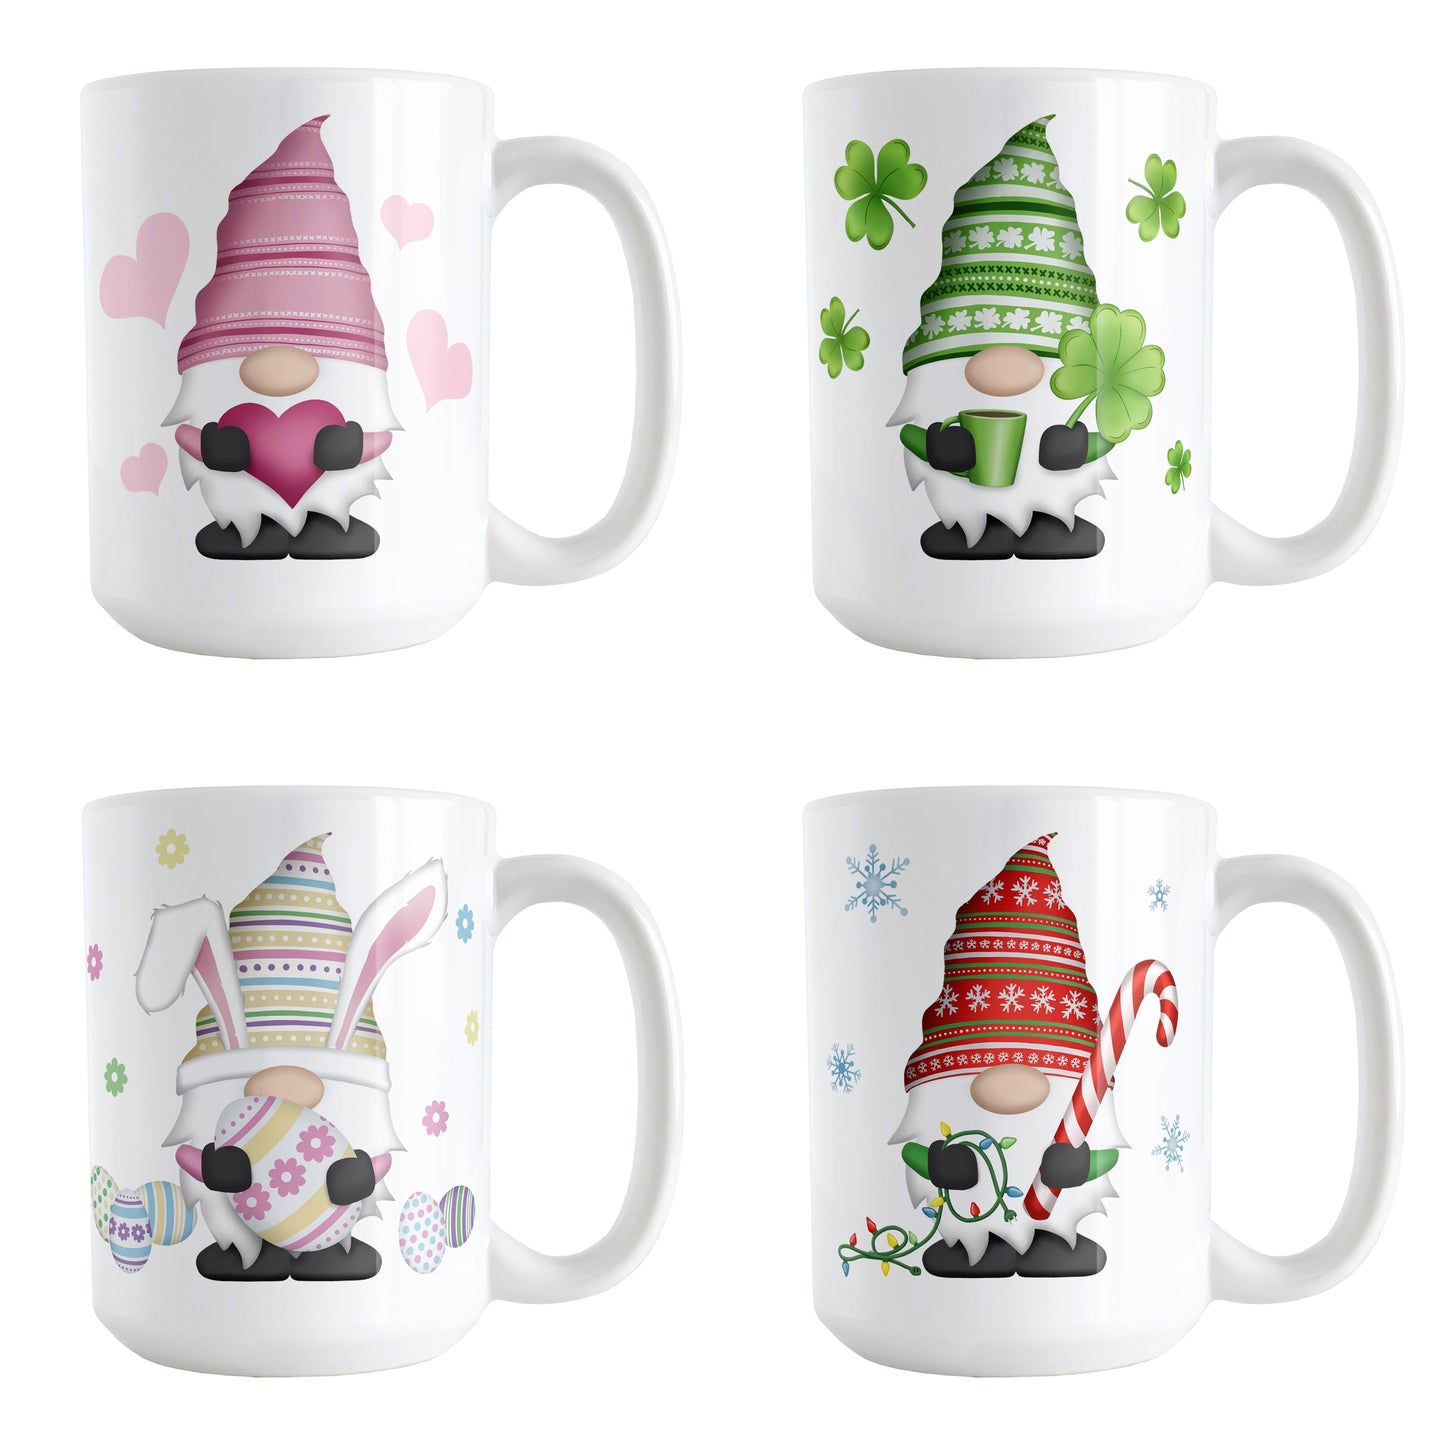 Set of 4 Holiday Gnome Mugs in 15oz size featuring designs and illustrations of gnomes in 4 holiday themes including Valentine's Day, St. Patrick's Day, Easter, and Christmas.